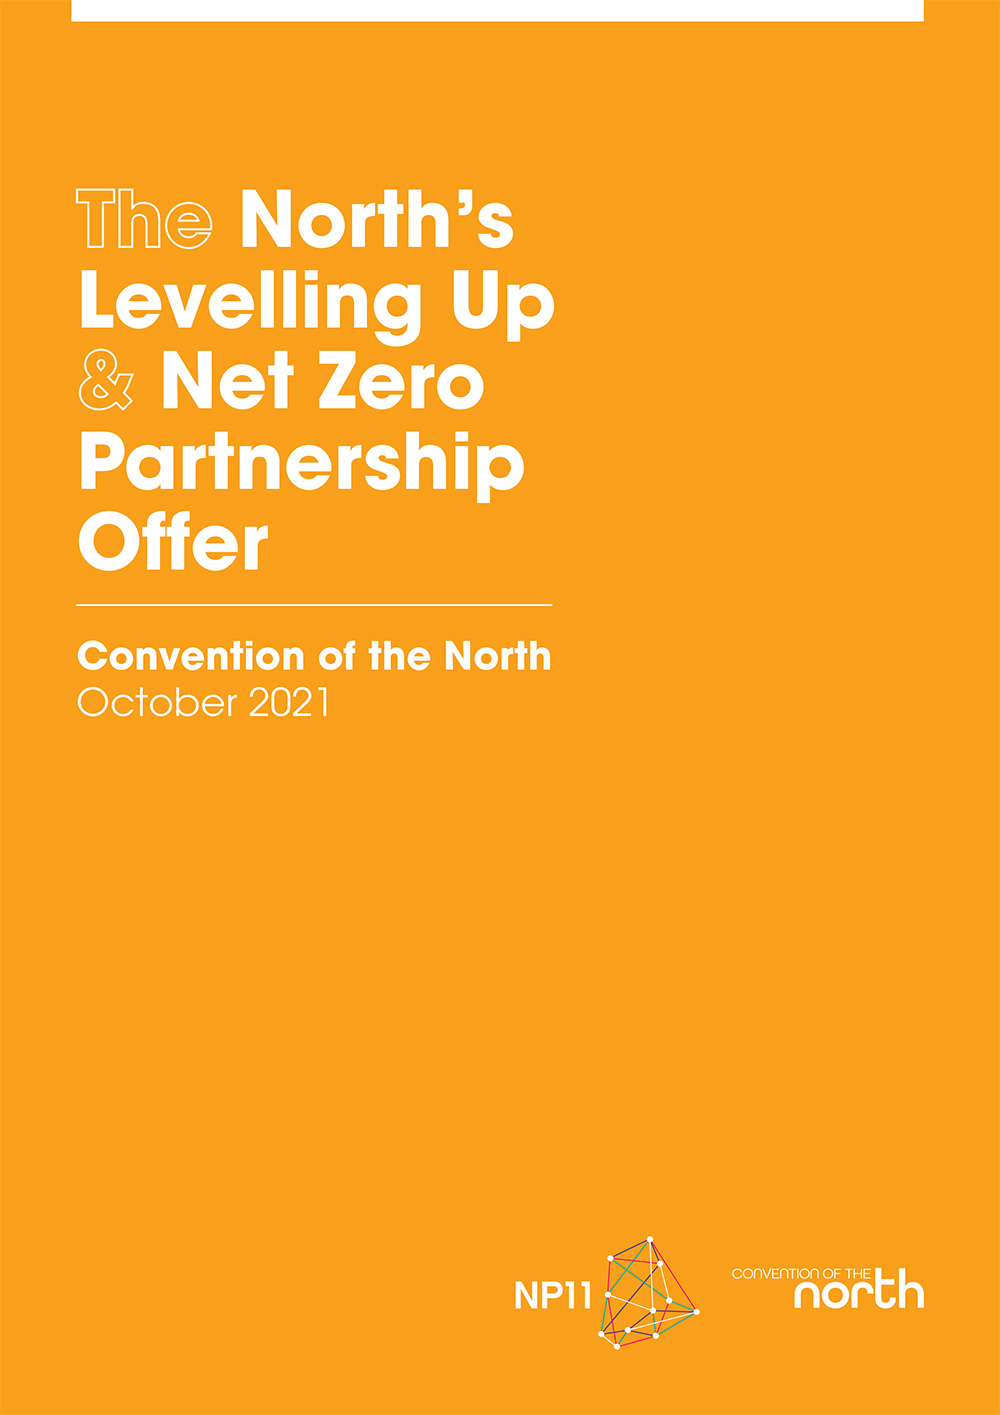 Convention of the North with NP11: our partnership offer